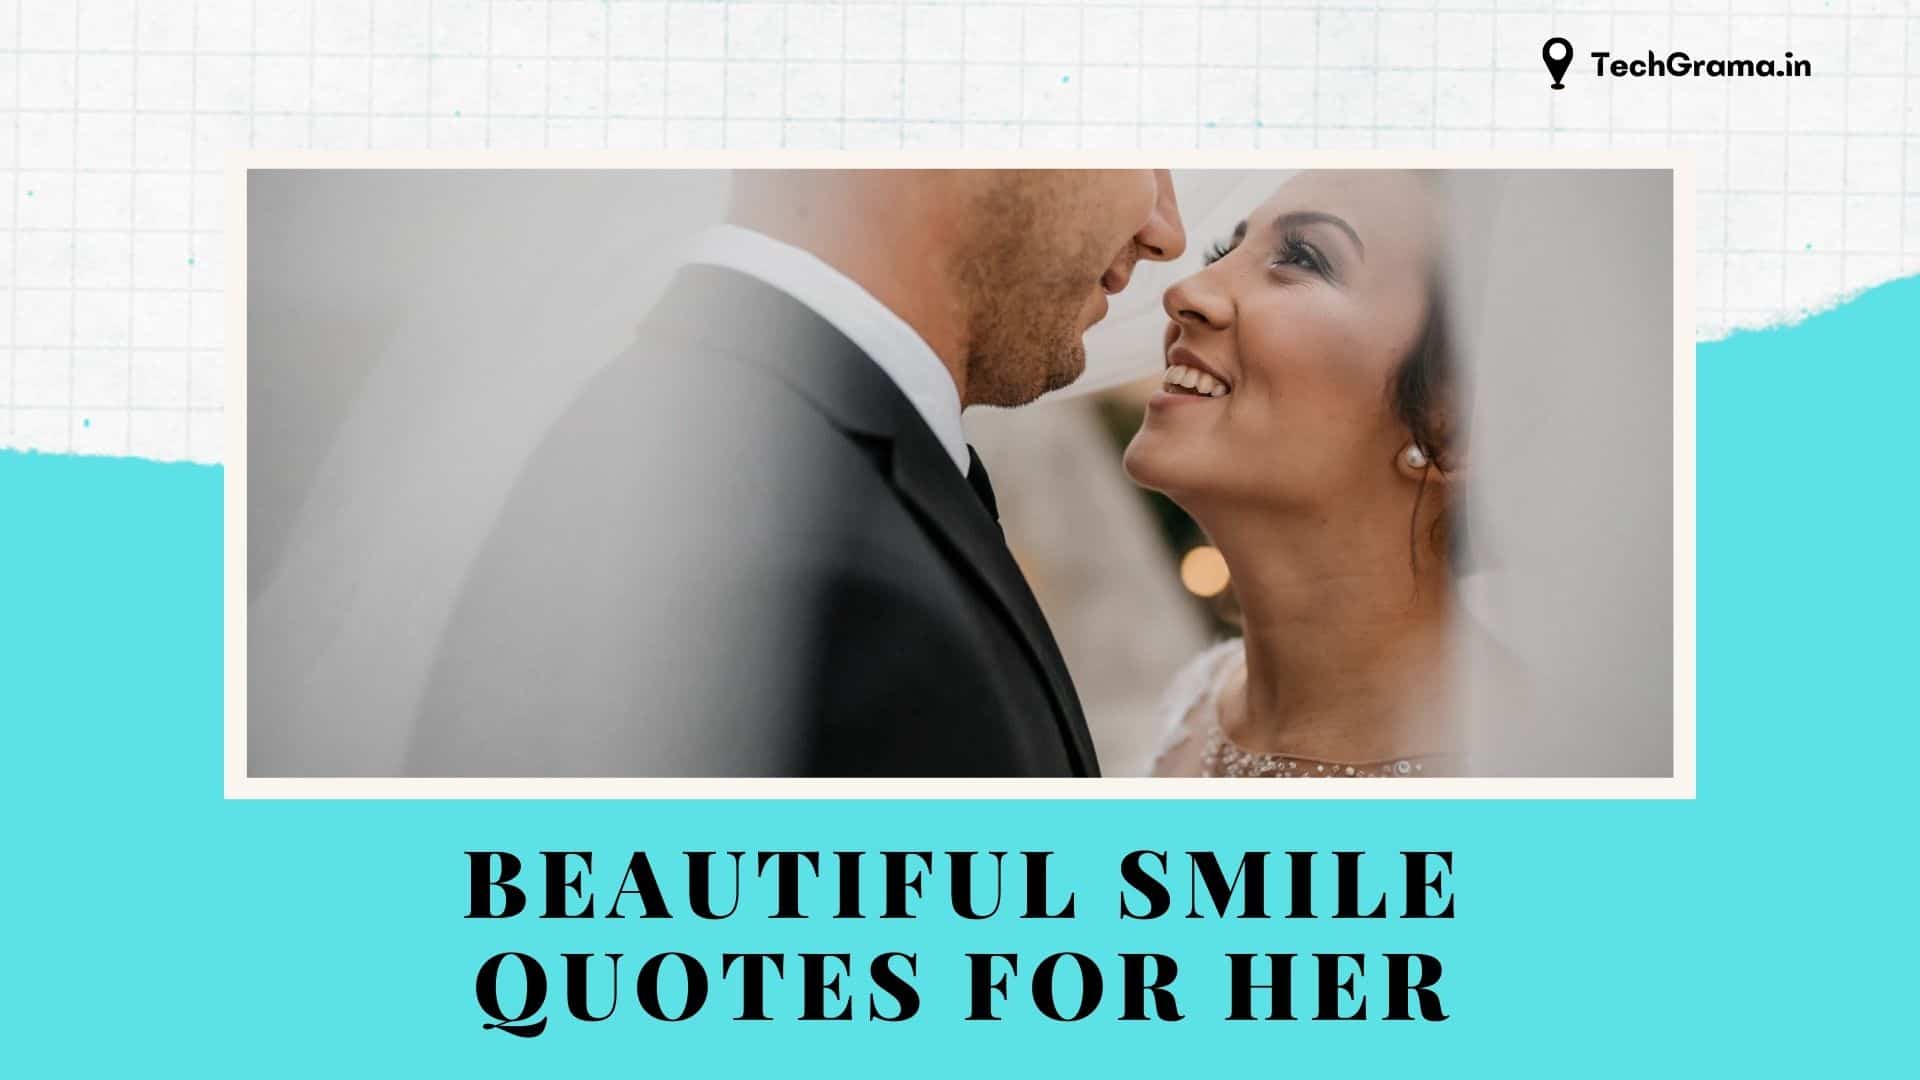 Best Beautiful Smile Quotes For Her, Smile Quotes For Her Instagram, Keep Smiling Quotes For Her, Love Smile Quotes For Her, Caption For Her Smile, Beautiful Quotes For Her Smile, Always Smile Quotes For Her, Funny Quotes to Make Her Smile, Cute Smile Quotes For Her, Quotes to Make Her Smile.